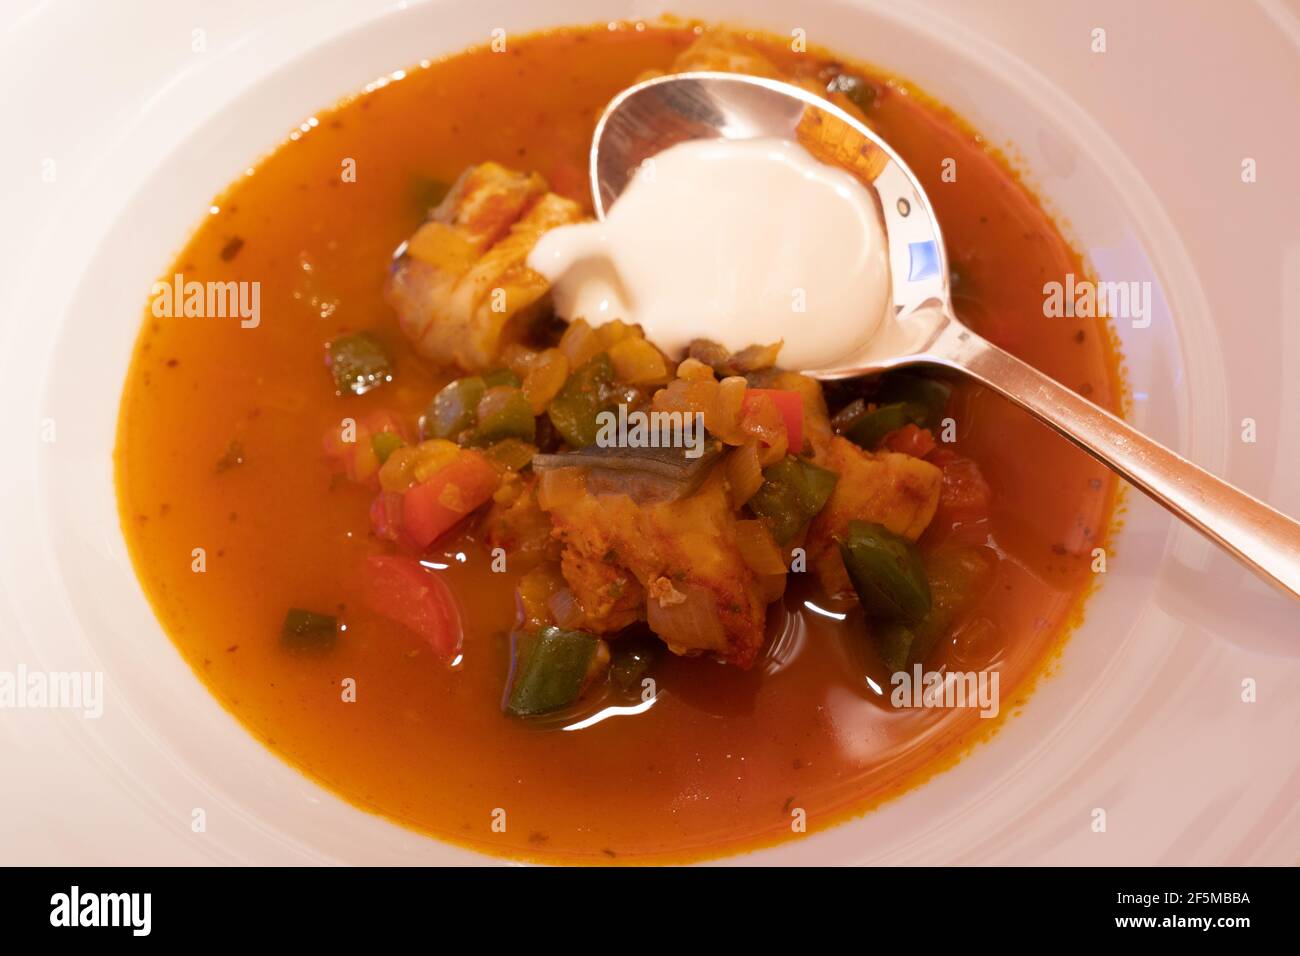 Halaszle, Hungarian Fishermans Soup or Fish Stew with Carp, Bell Peppers, Paprika and Sour Cream Stock Photo